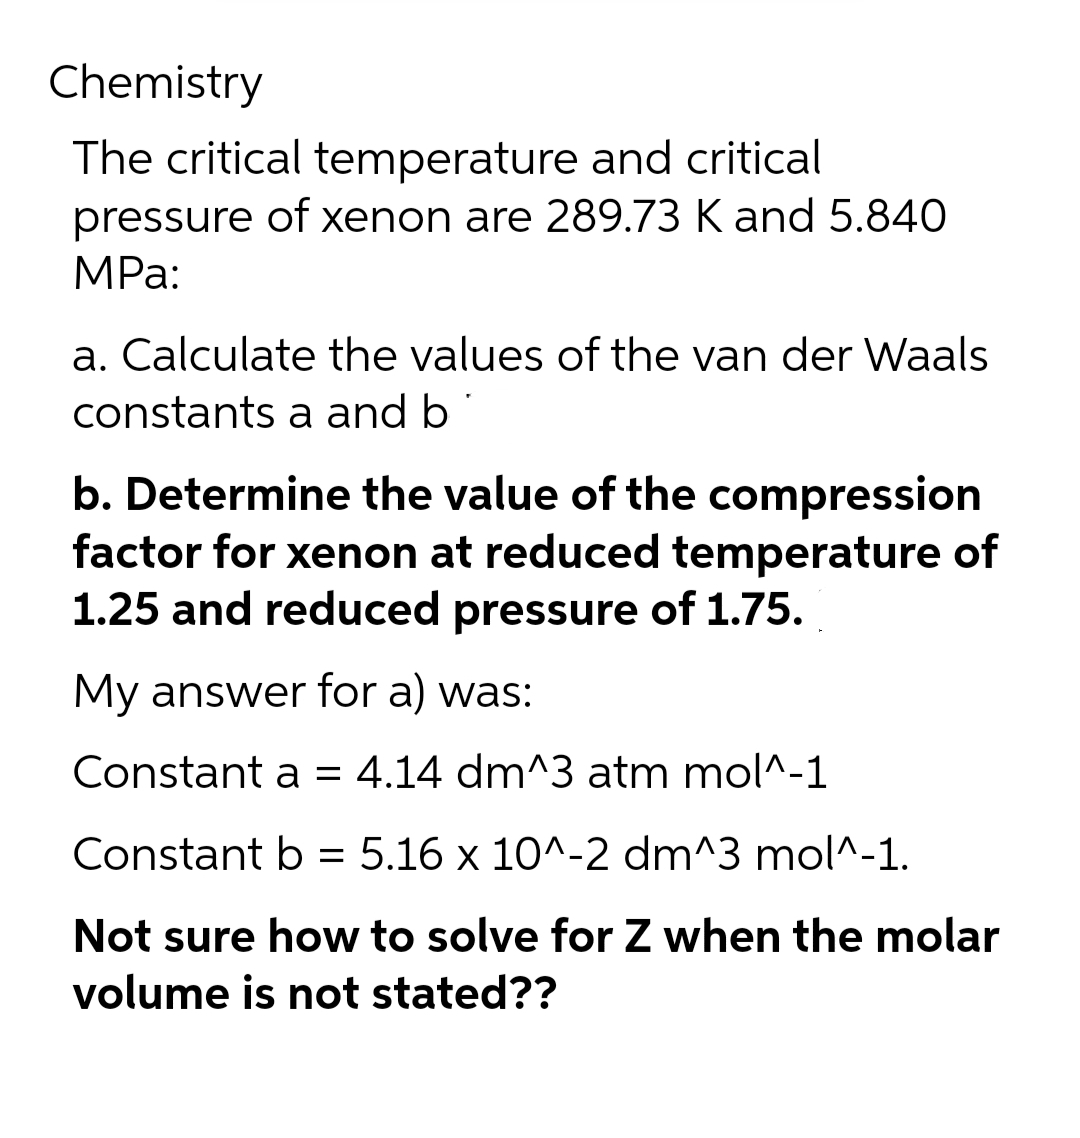 Chemistry
The critical temperature and critical
pressure of xenon are 289.73 K and 5.840
MPa:
a. Calculate the values of the van der Waals
constants a and b
b. Determine the value of the compression
factor for xenon at reduced temperature of
1.25 and reduced pressure of 1.75.
My answer for a) was:
Constant a = 4.14 dm^3 atm mol^-1
Constant b = 5.16 x 10^-2 dm^3 mol^-1.
Not sure how to solve for Z when the molar
volume is not stated??